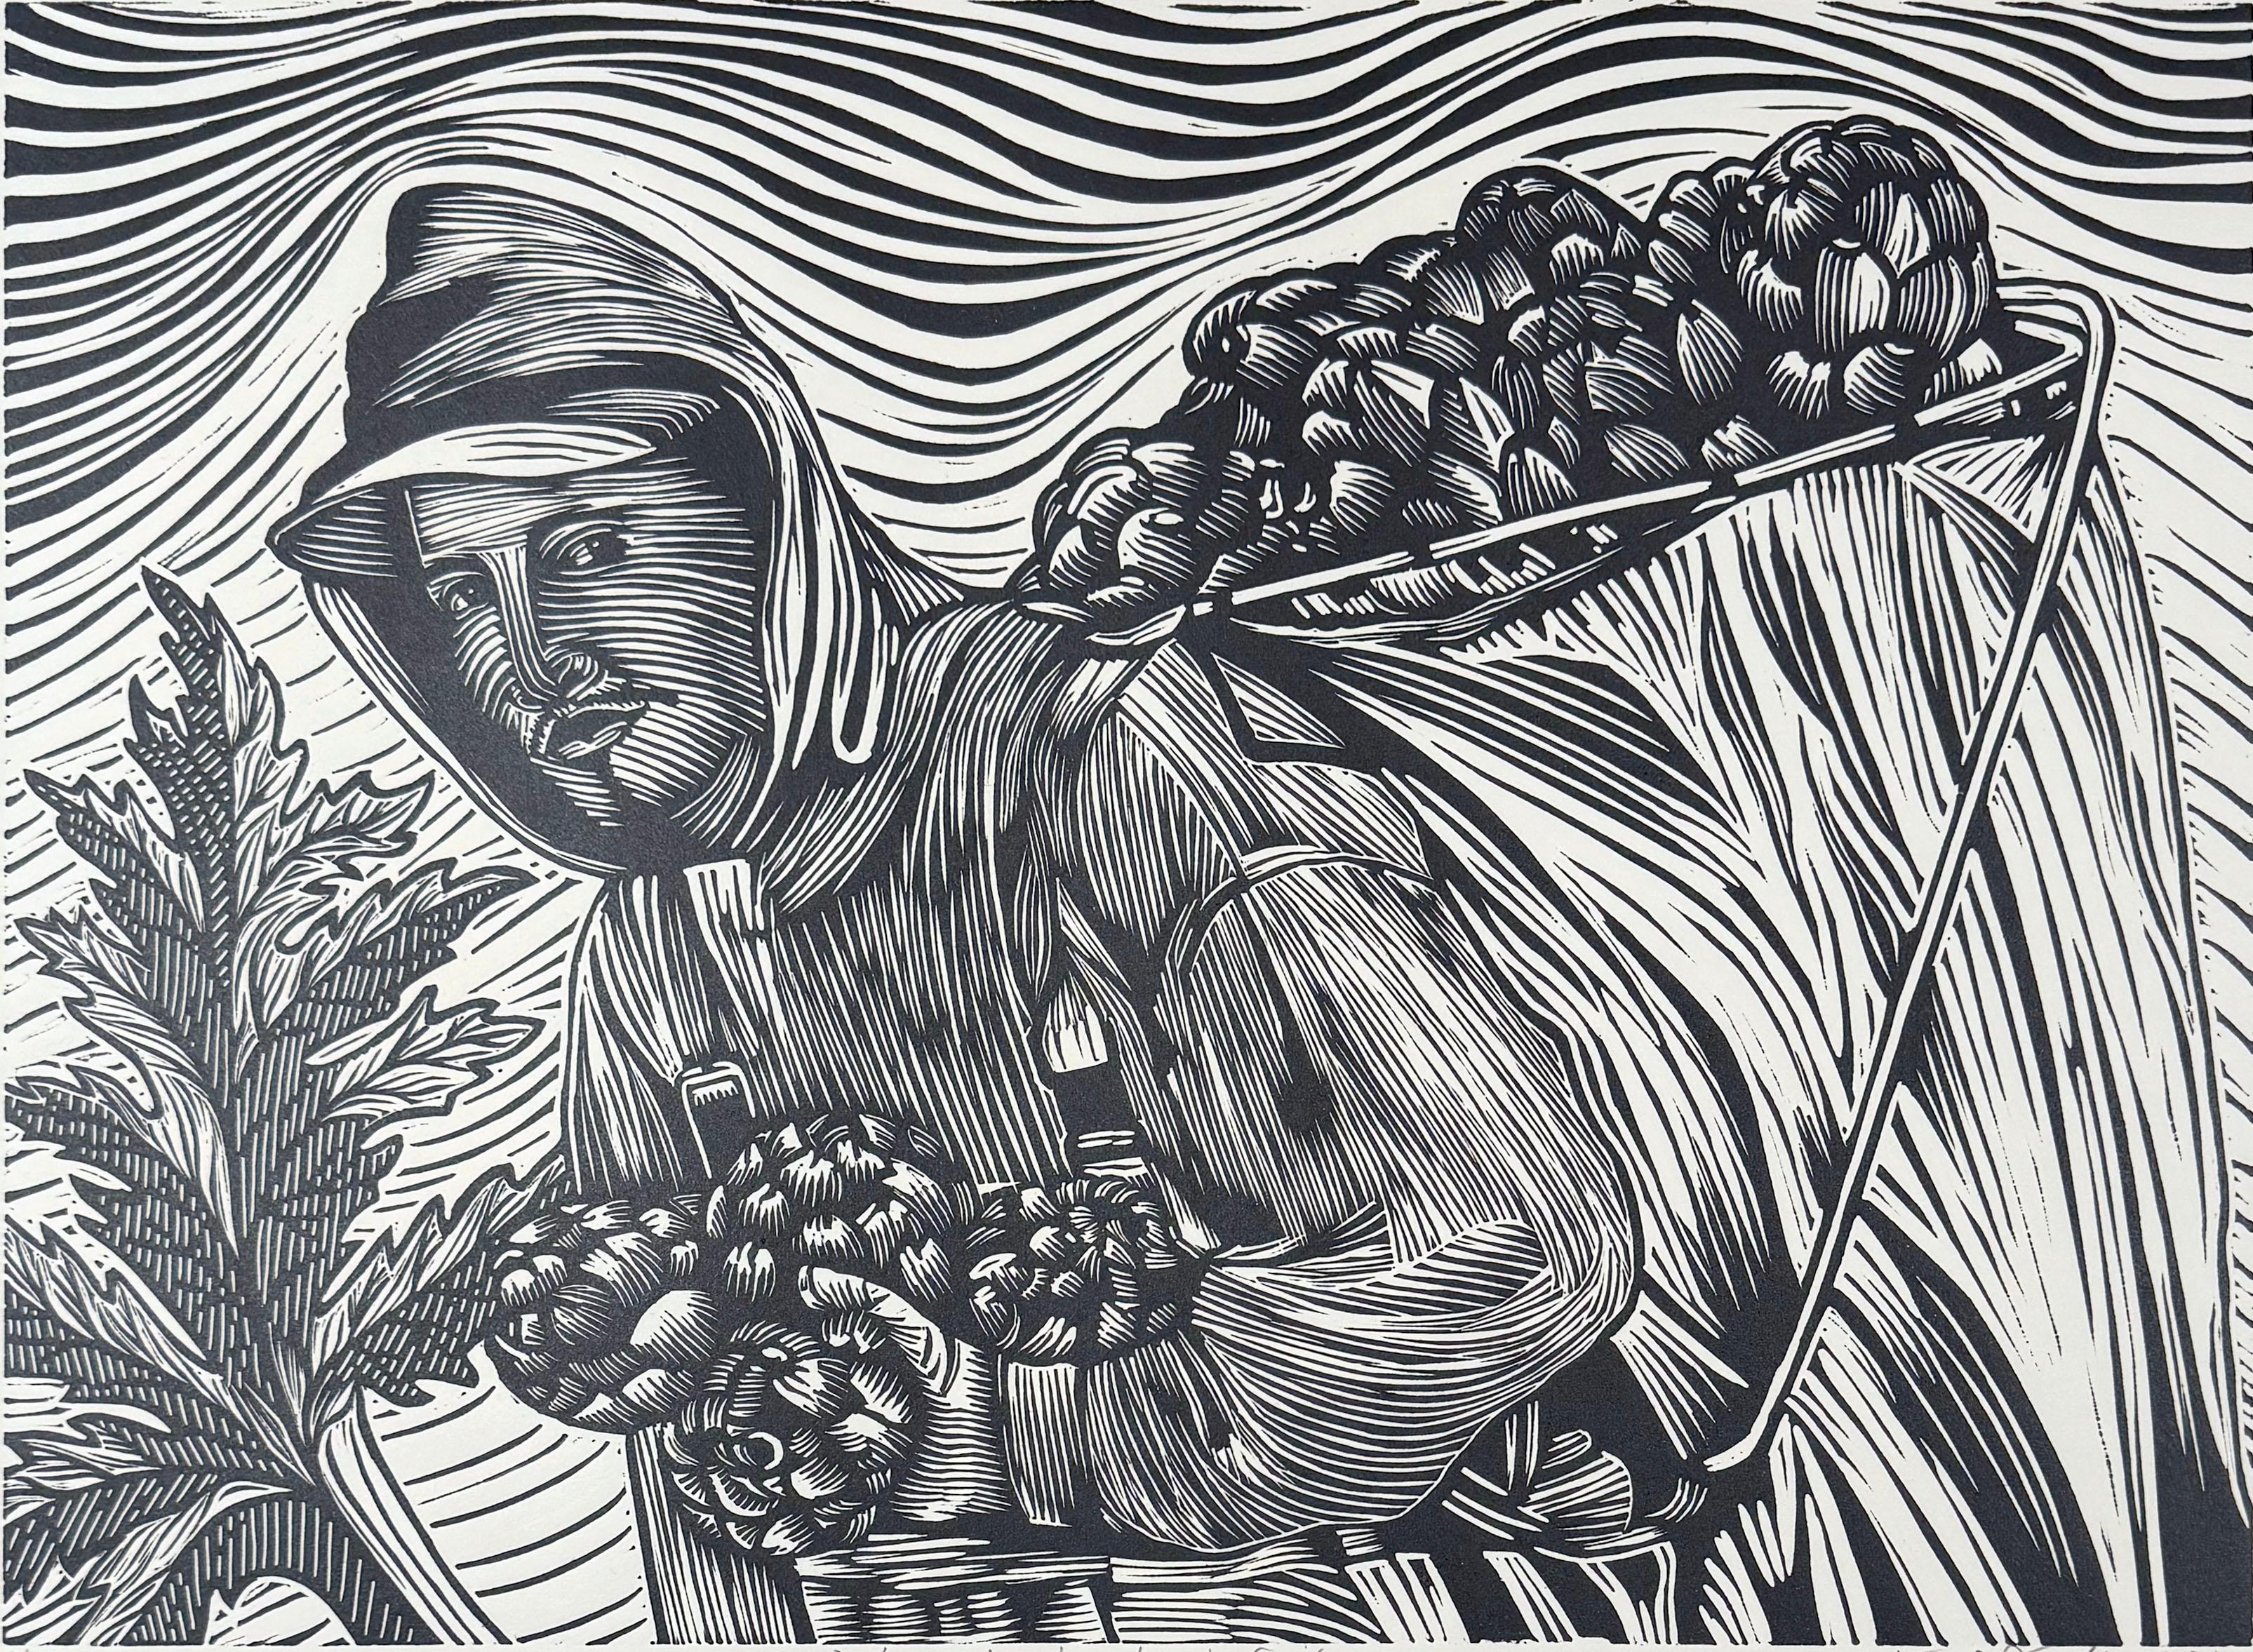 Medium: linocut
Year: 2021
Image Size: 13 x 18 inches
Edition size: 10

Young migrant worker harvesting artichokes.

As a cultural activist/artist/printmaker, Juan Fuentes has dedicated his career to being part of a global movement for social